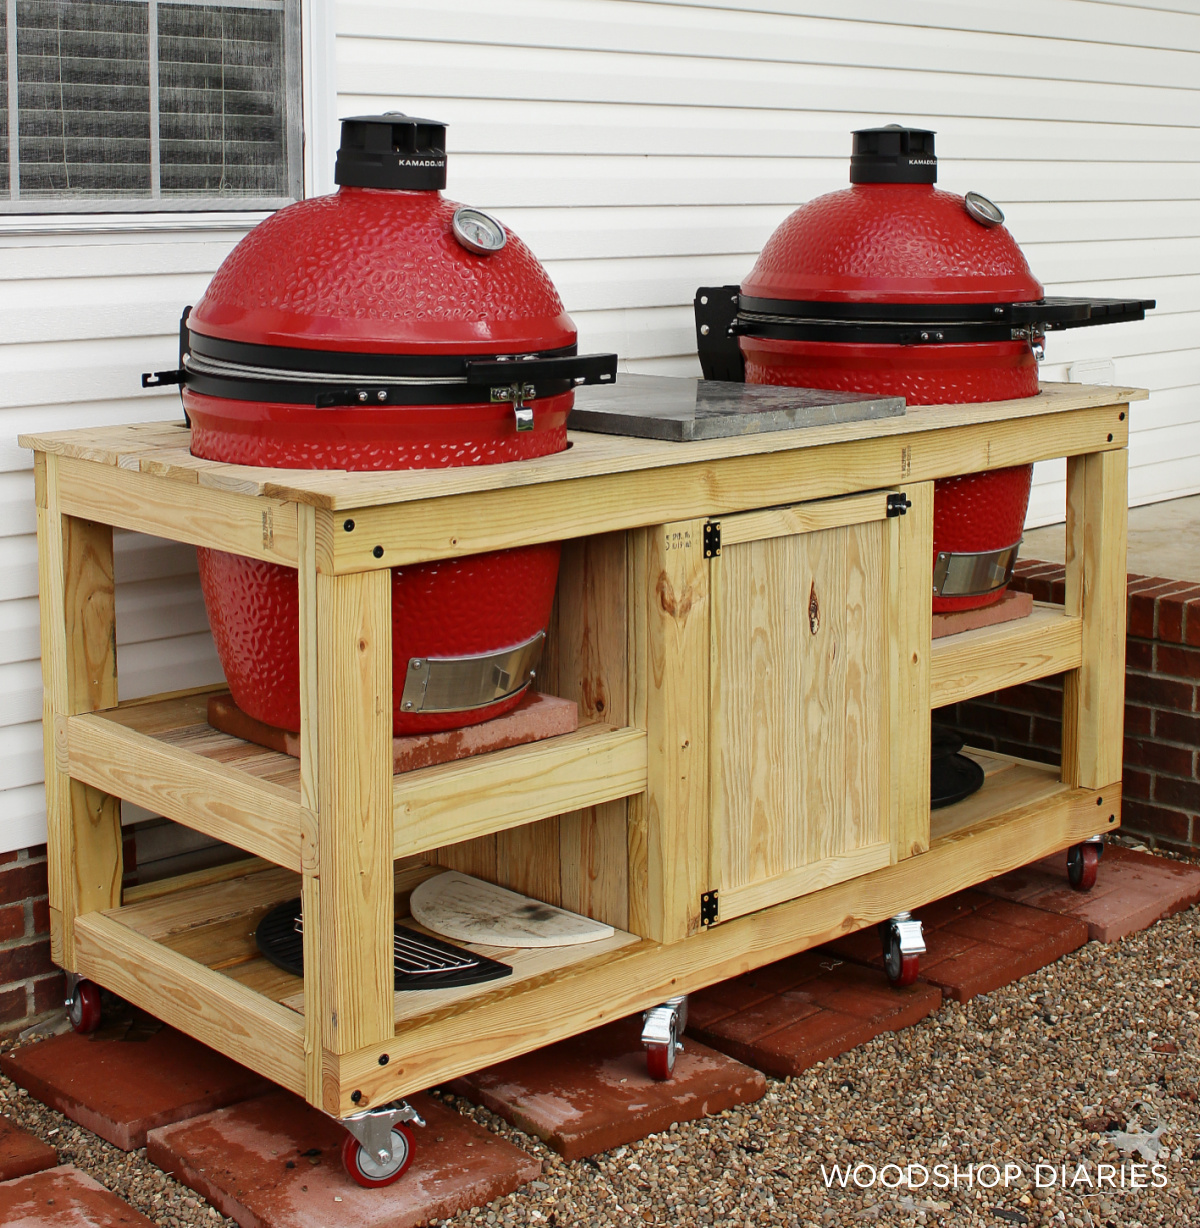 Mobile wooden grill cart with two ceramic Kamado Joe Grills on open shelves with accessories stored below